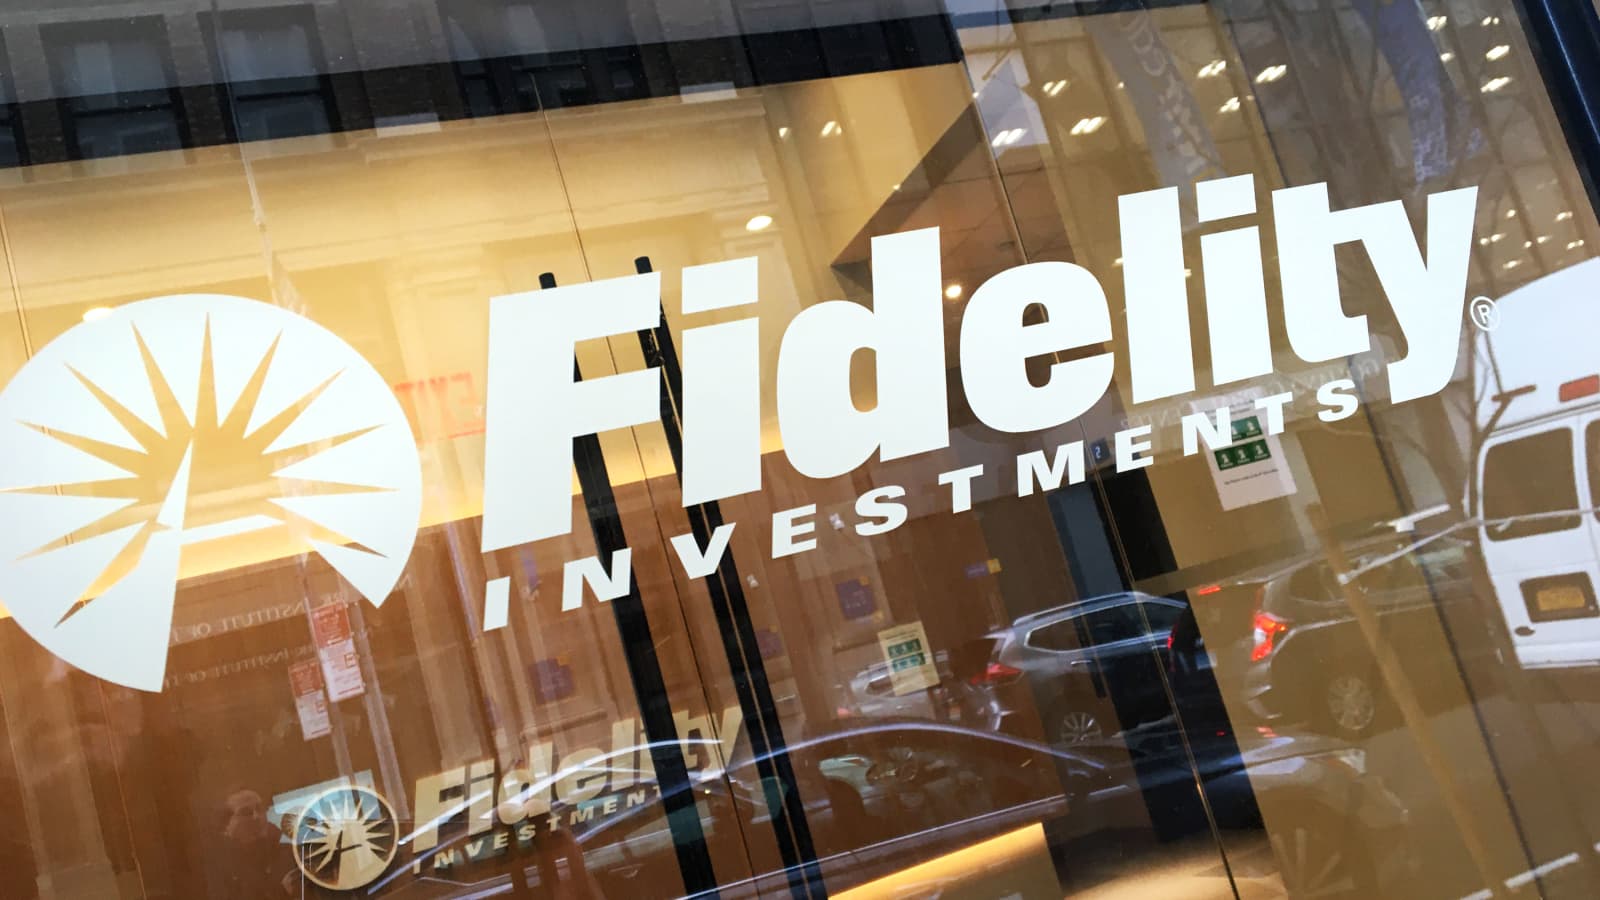 fidelity cryptocurrency trading